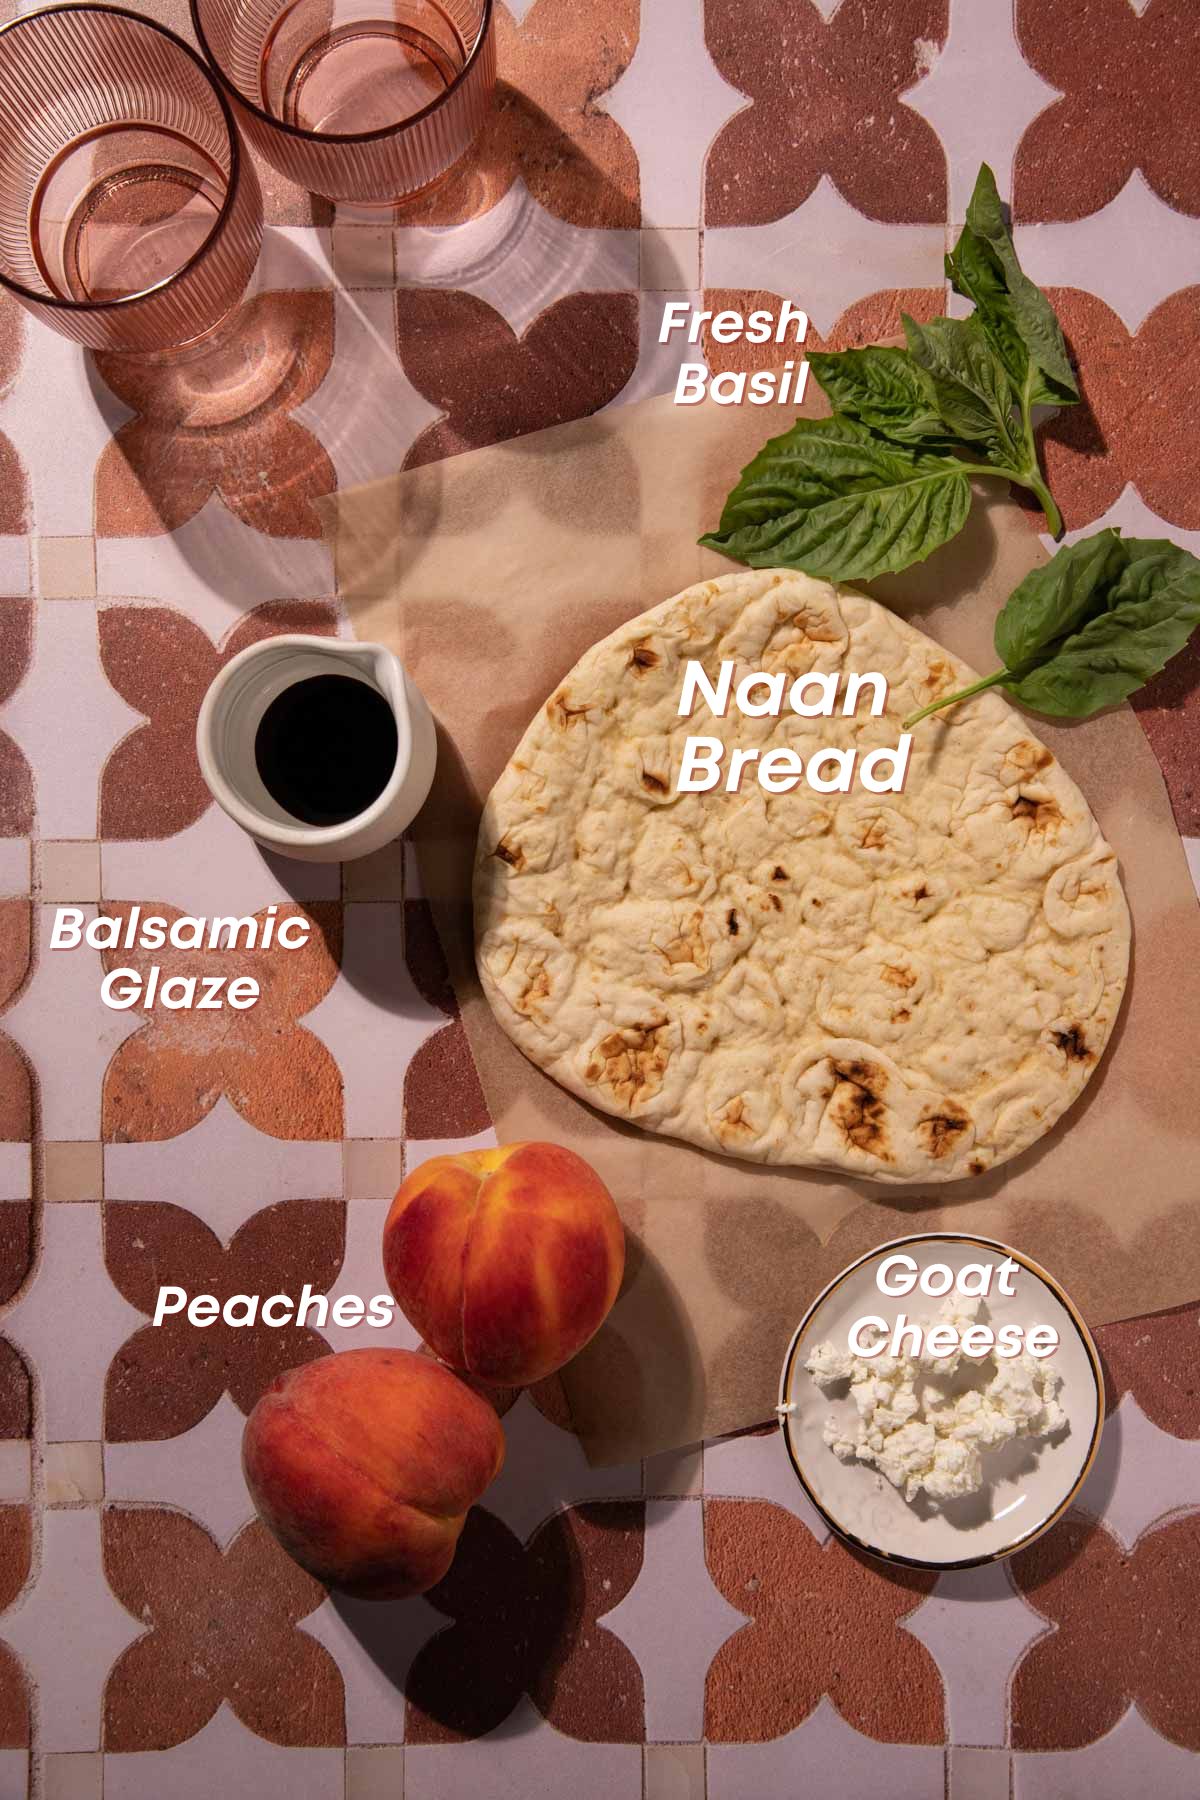 Naan bread, peaches, goat cheese, and basil on pink tile